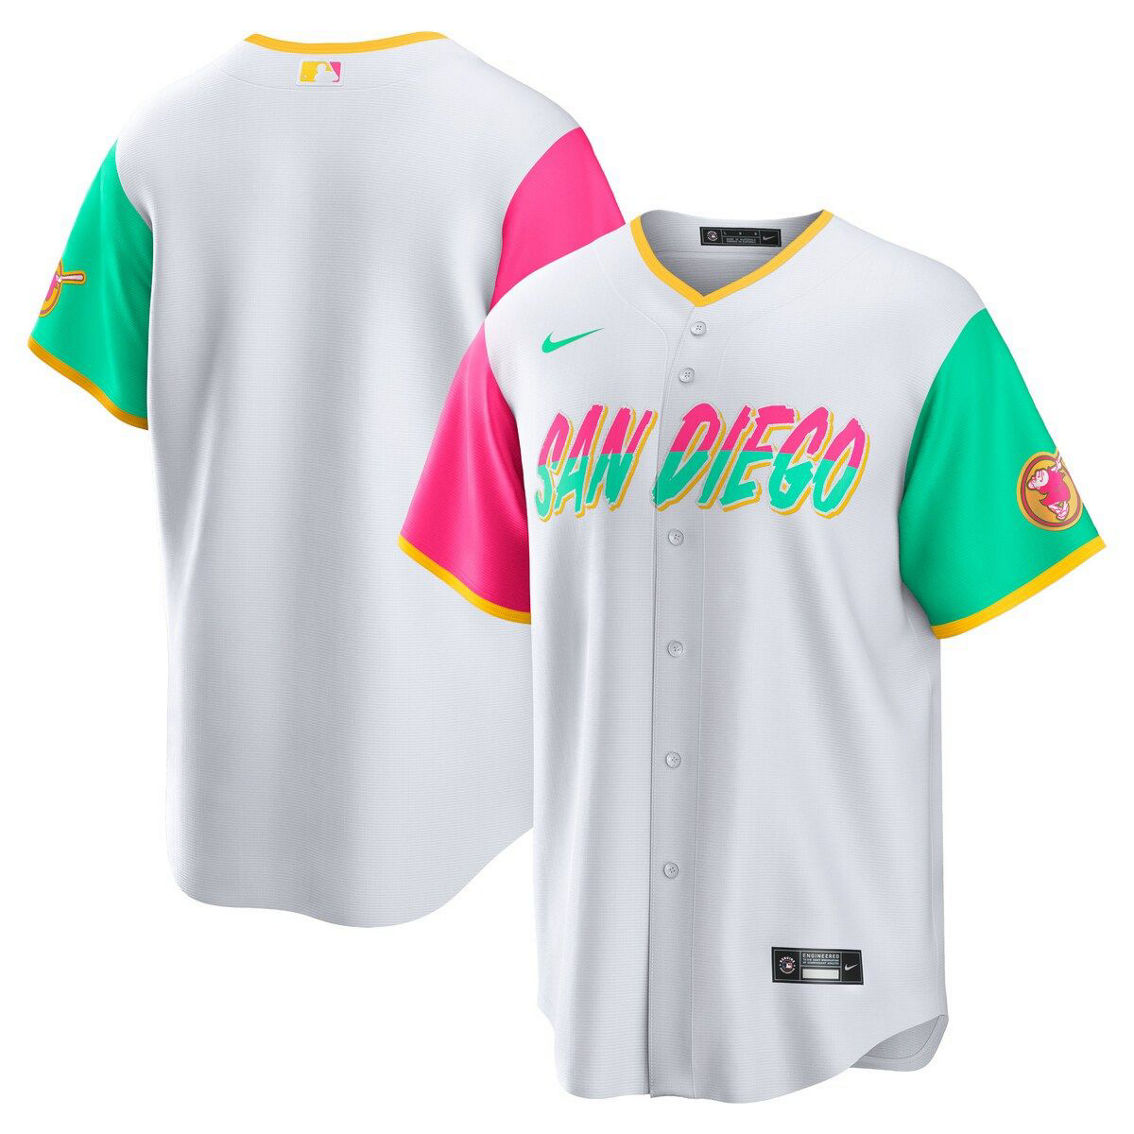 Nike Men's White San Diego Padres City Connect Replica Team Jersey - Image 2 of 4